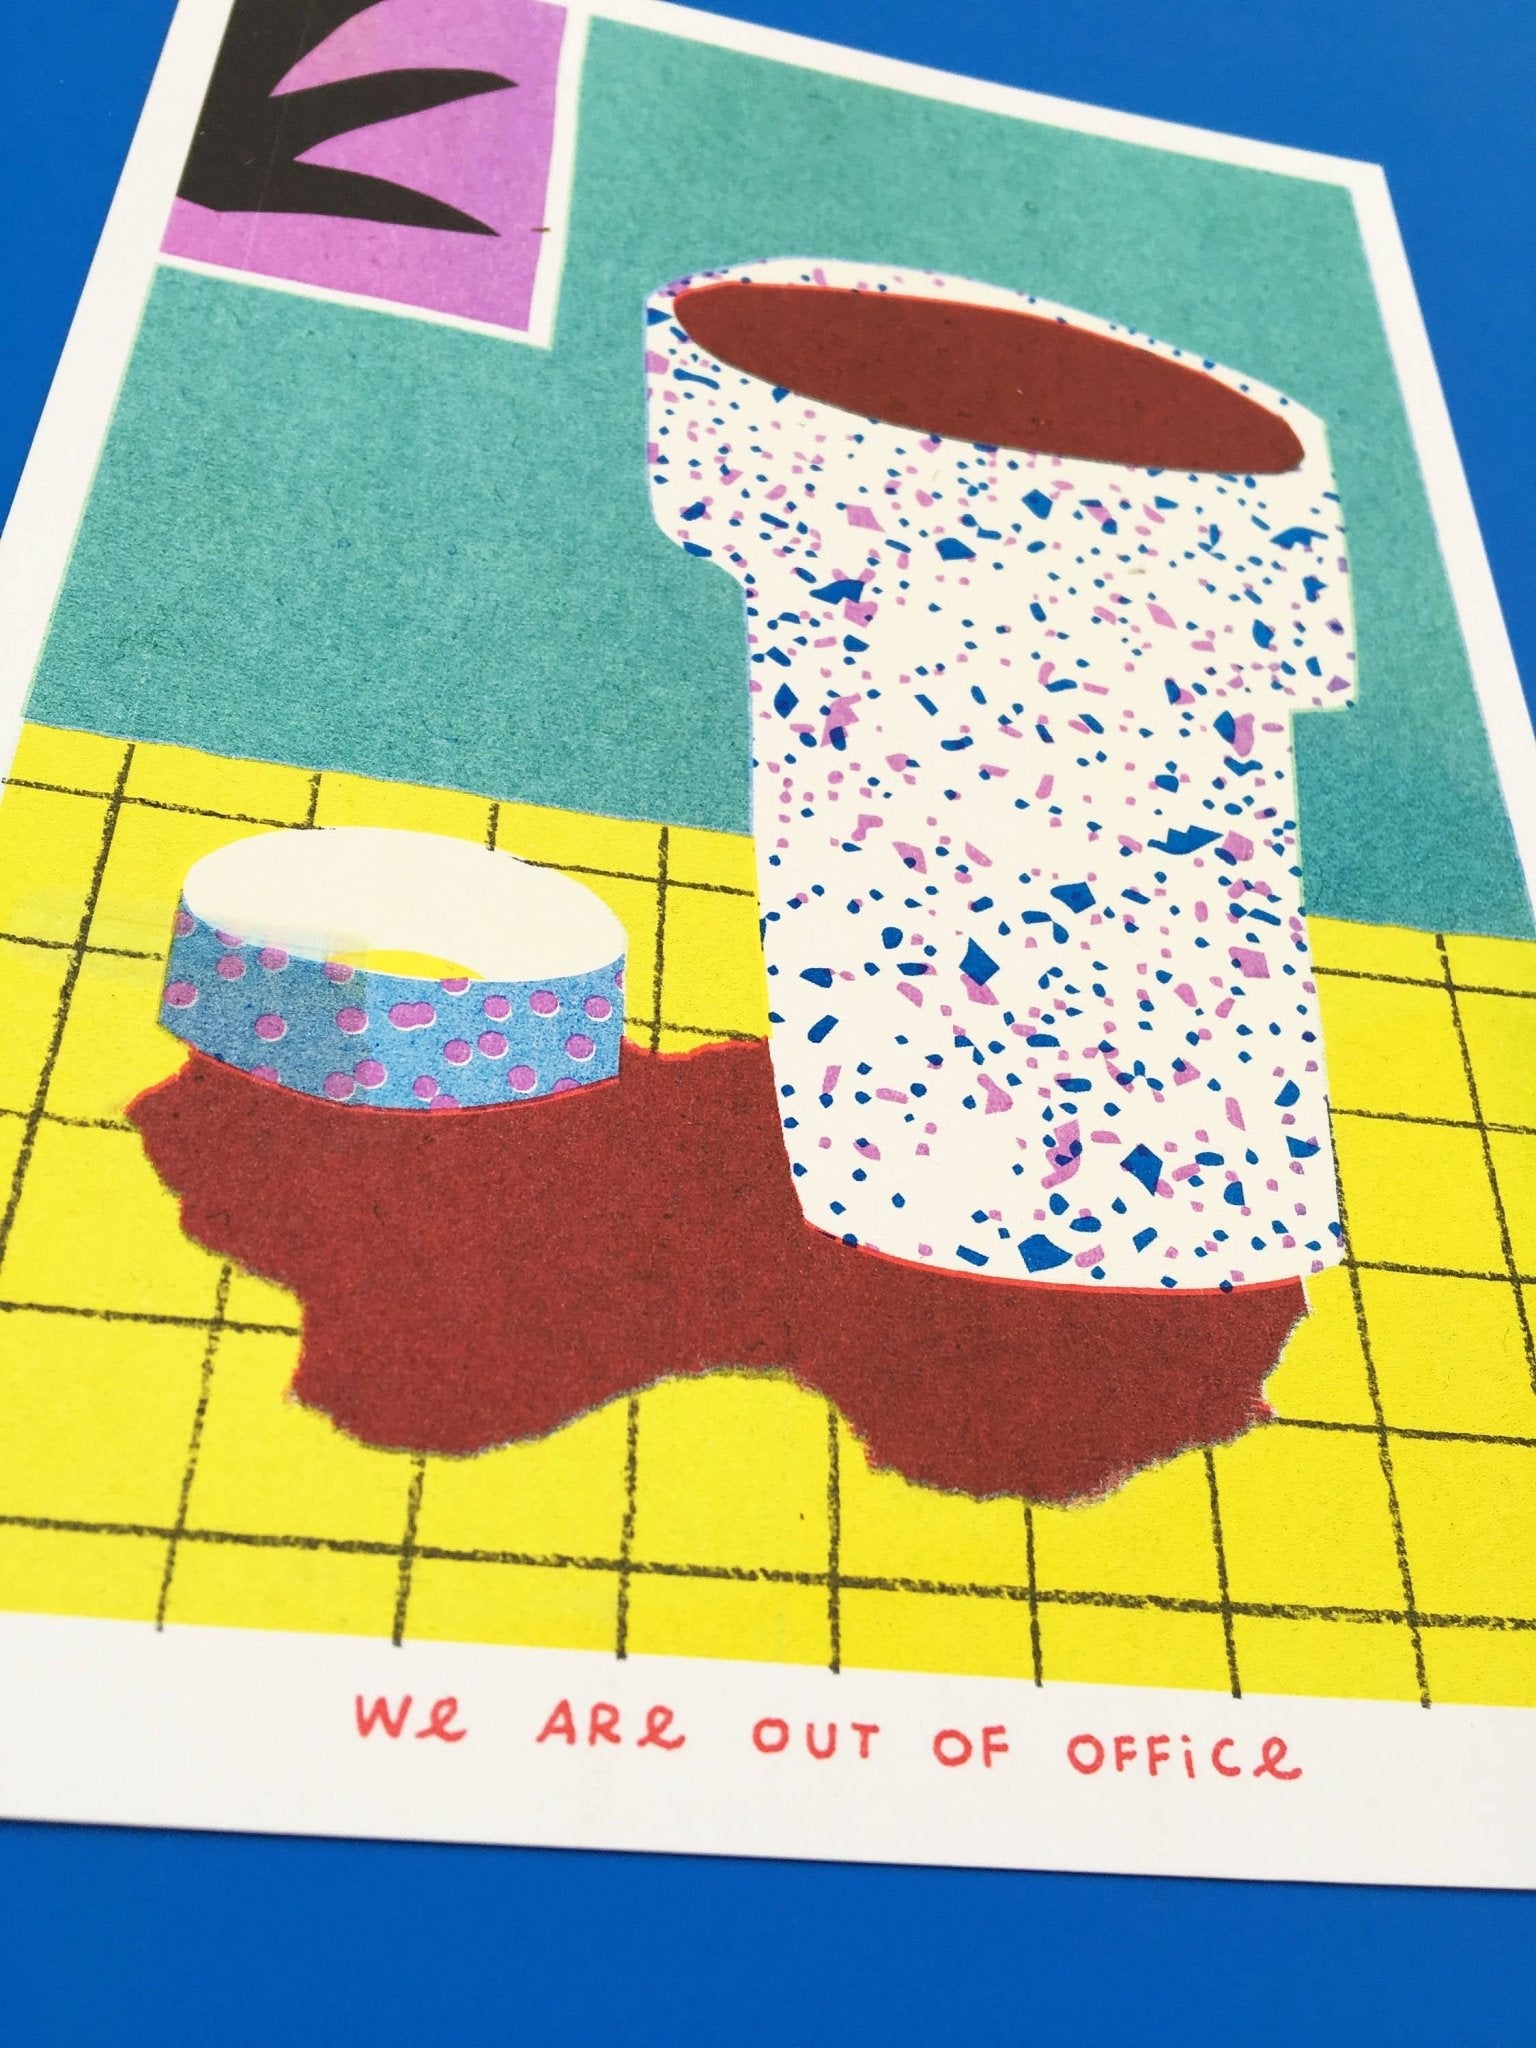 We Are Out of Office - A Risograph Print of a Still Life Favourite Cups - Ensemble Studios